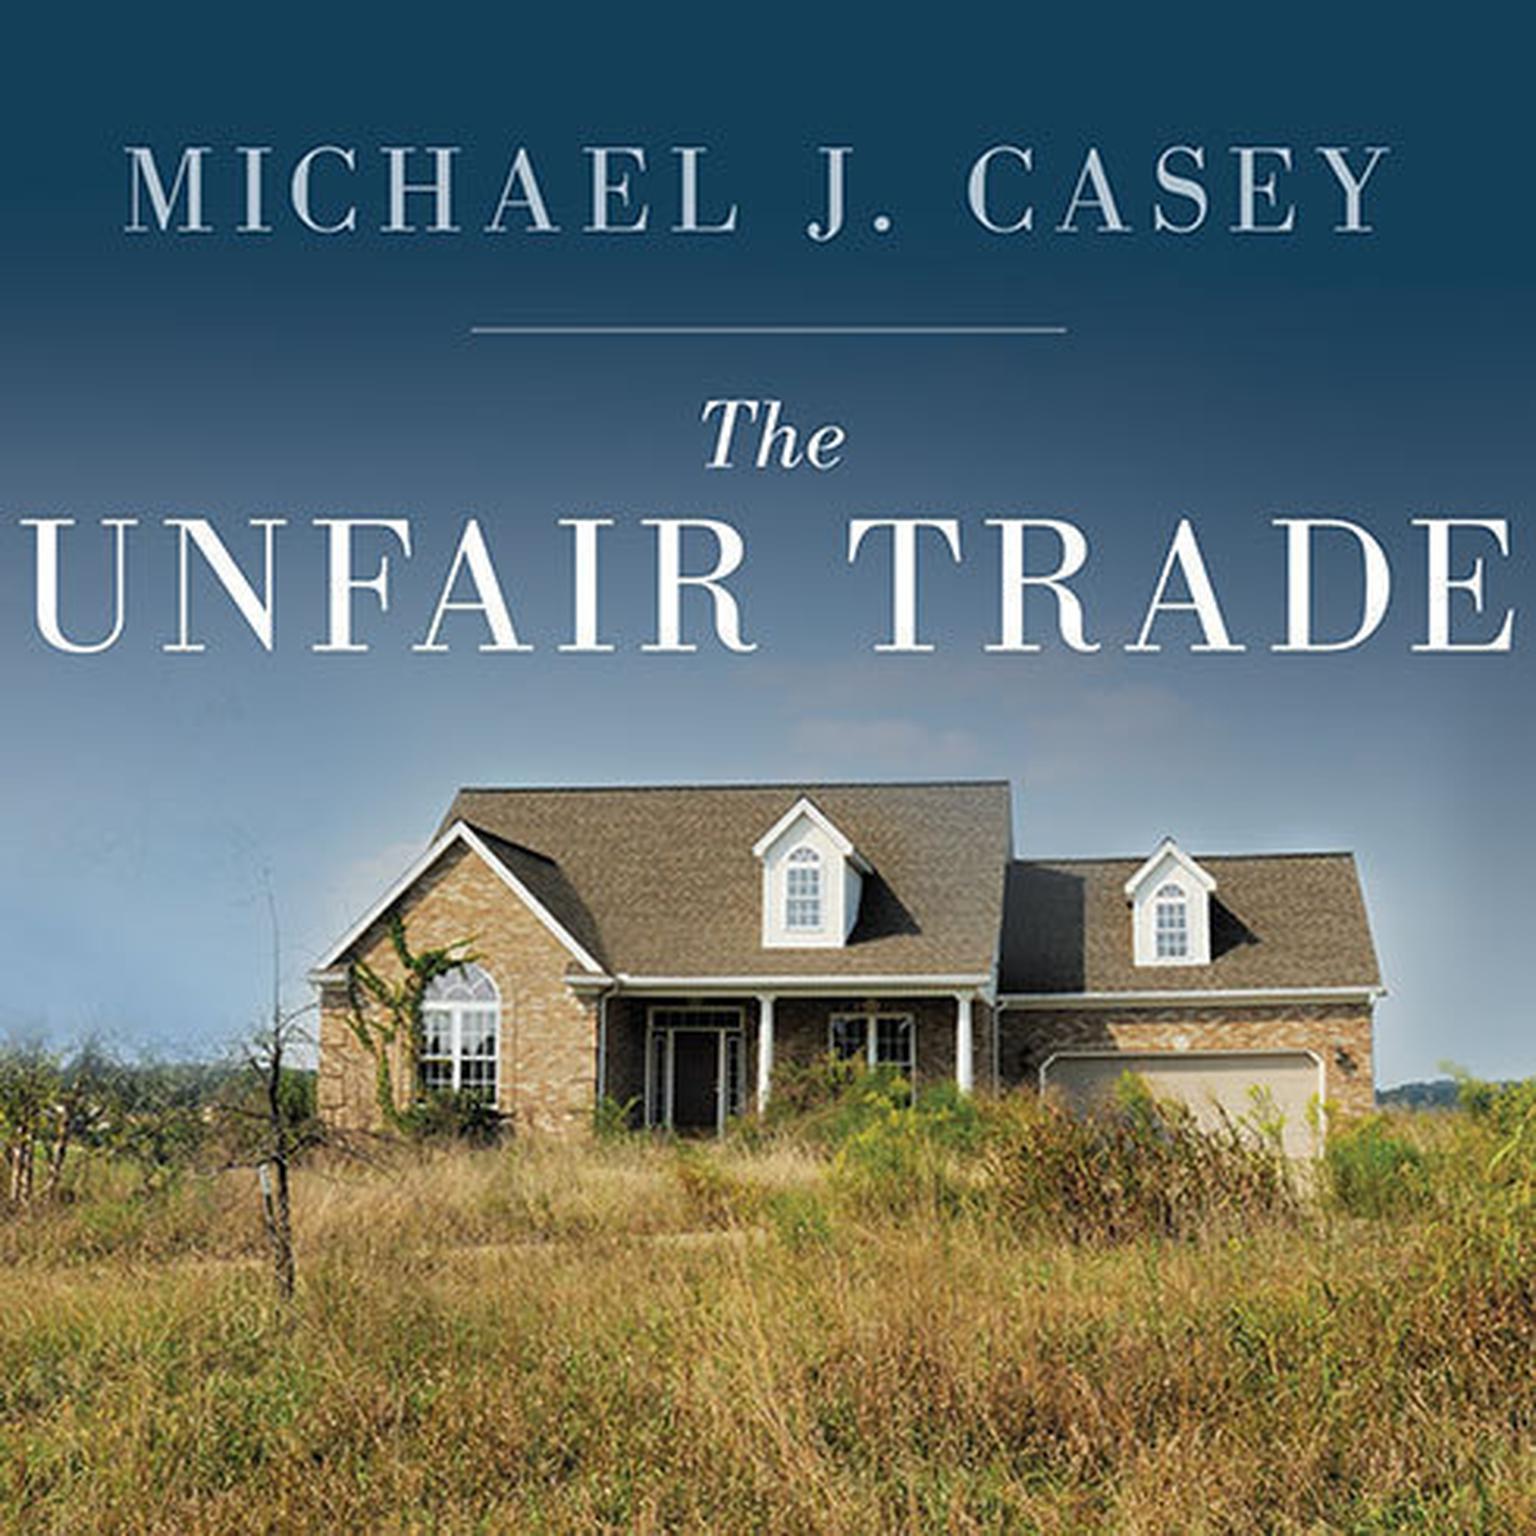 The Unfair Trade: How Our Broken Global Financial System Destroys the Middle Class Audiobook, by Michael J. Casey